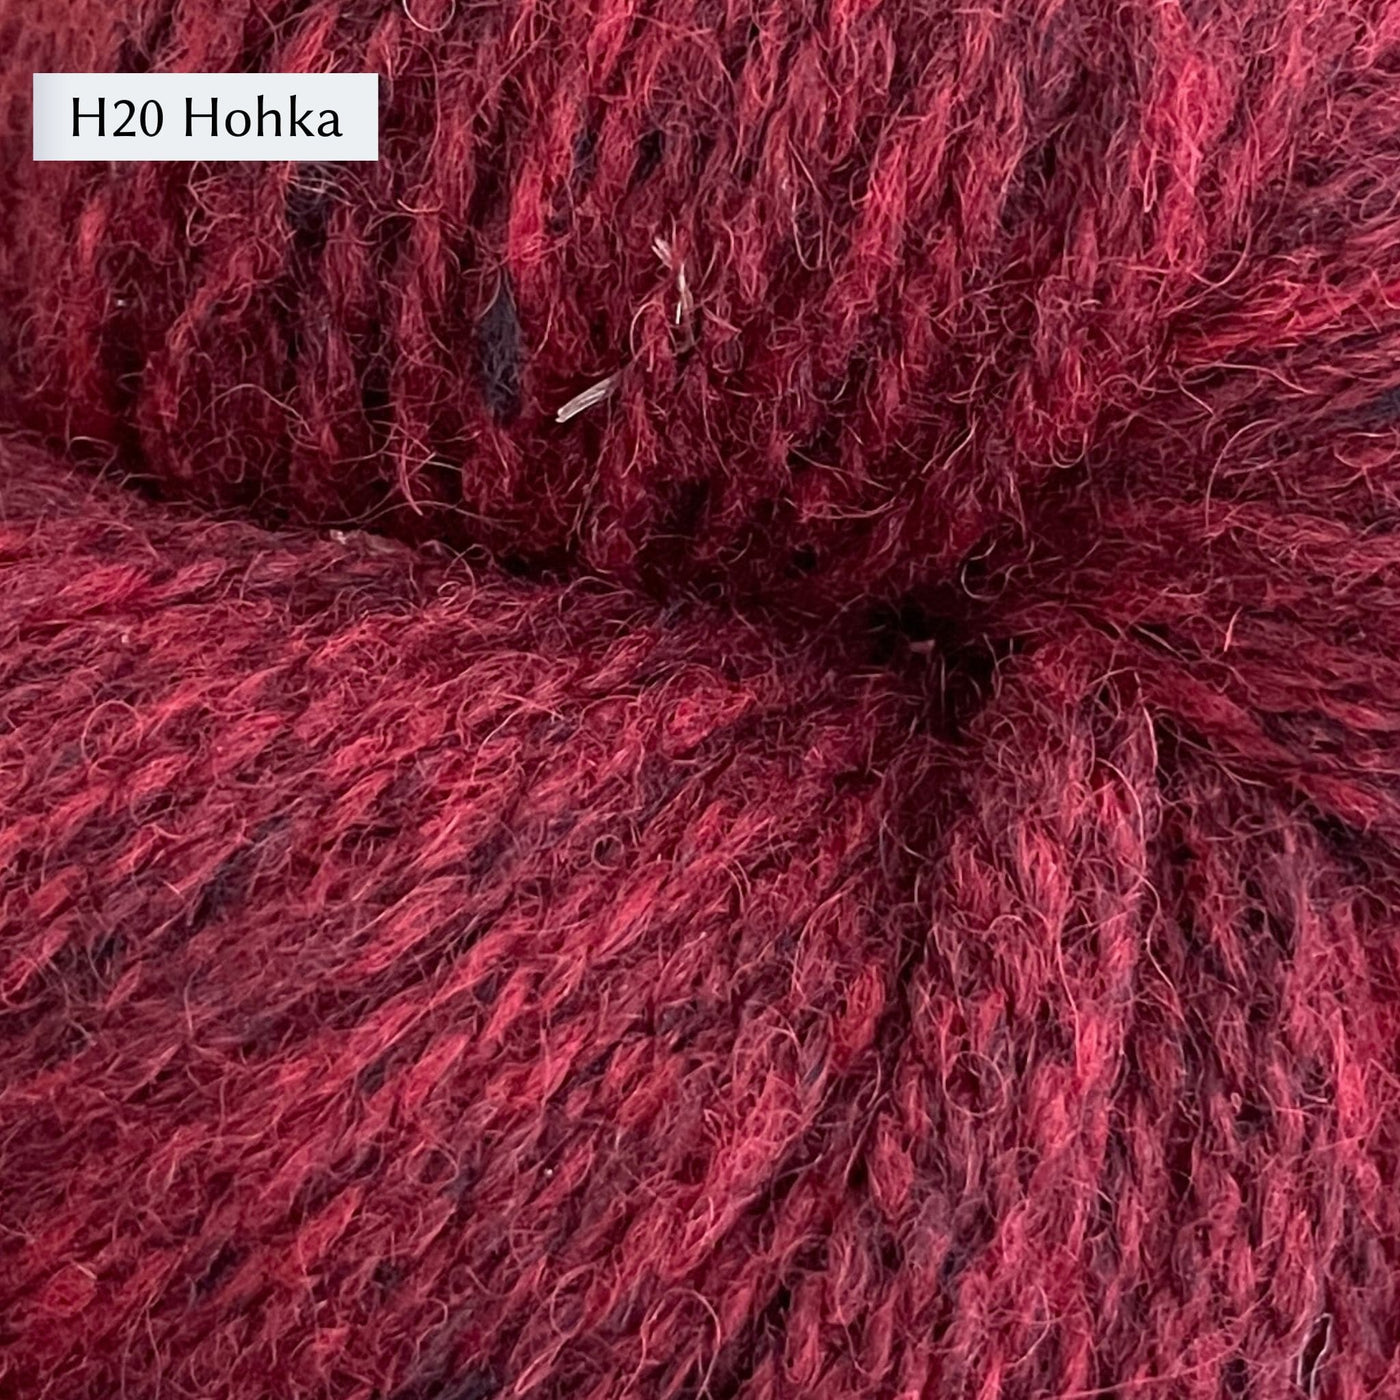 Tukuwool DK Yarn, 100% Finnish Wool shown in colorway H20 which is a heathered deep red. 